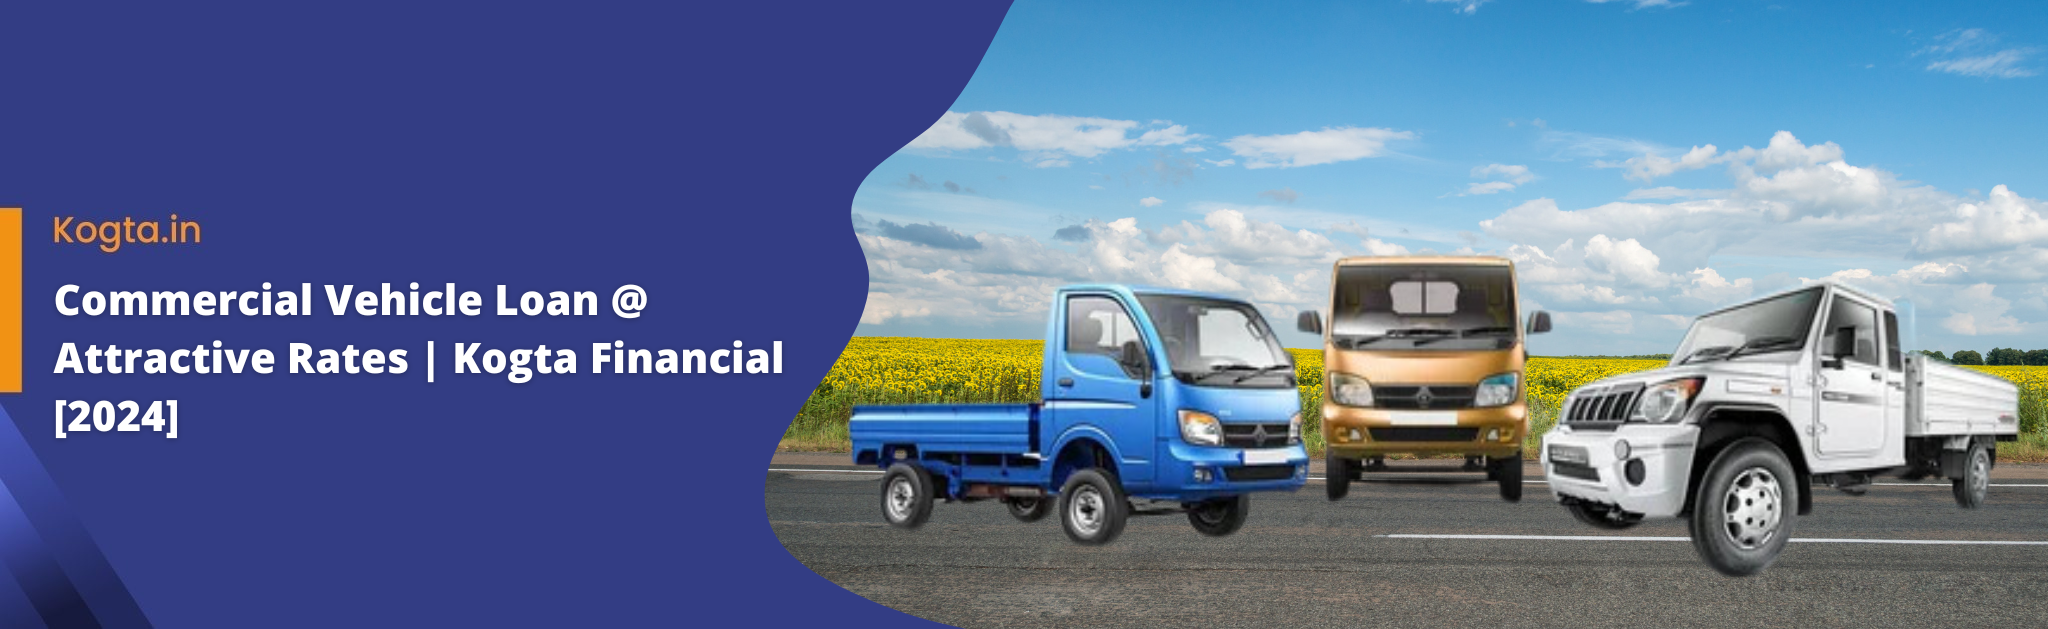 Commercial Vehicle Loan @ Attractive Rates [2024]